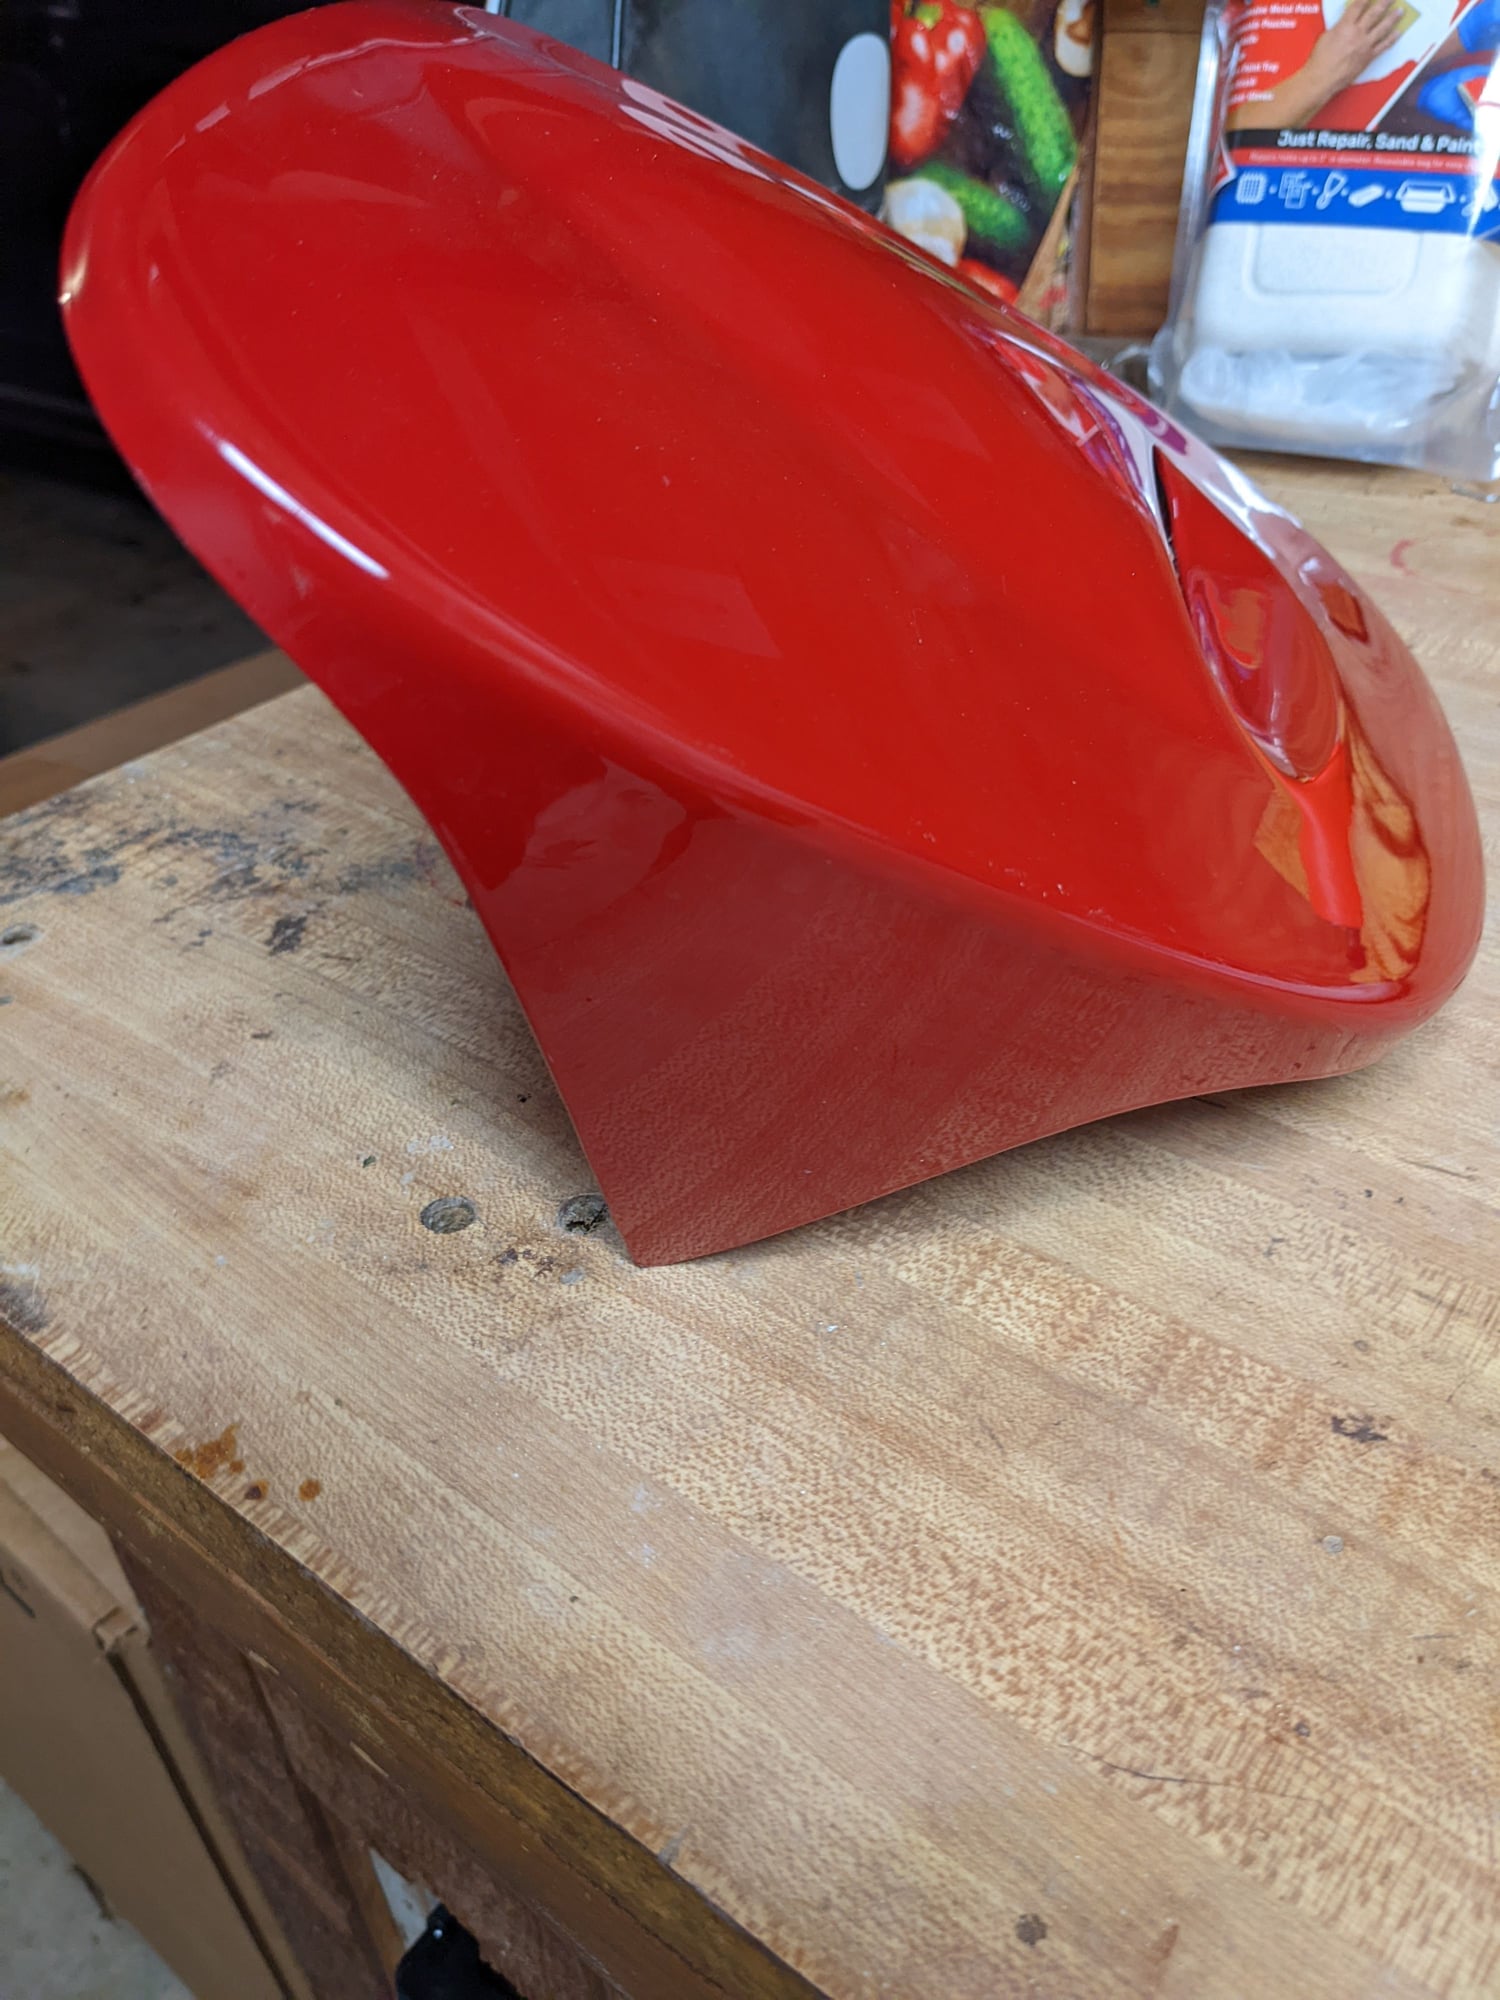 Exterior Body Parts - Vented Passenger Headlight Cover - Red - Used - 1993 to 1995 Mazda RX-7 - Austin, TX 78759, United States